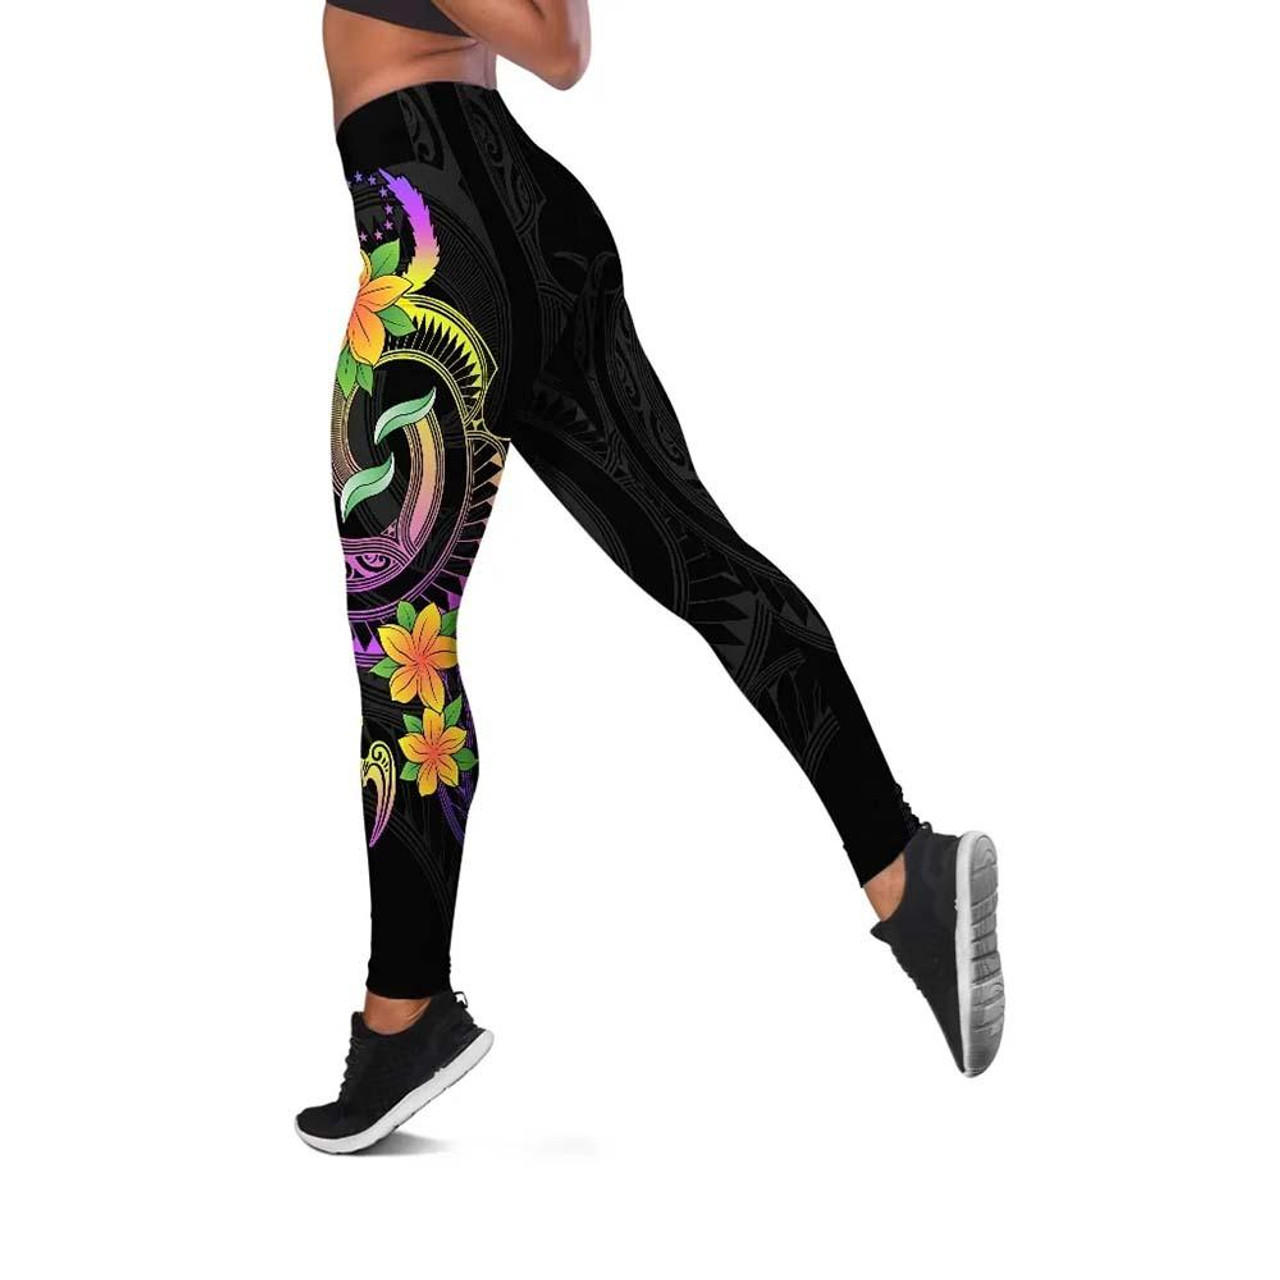 Pohnpei Legging - Plumeria Flowers with Spiral Patterns 1